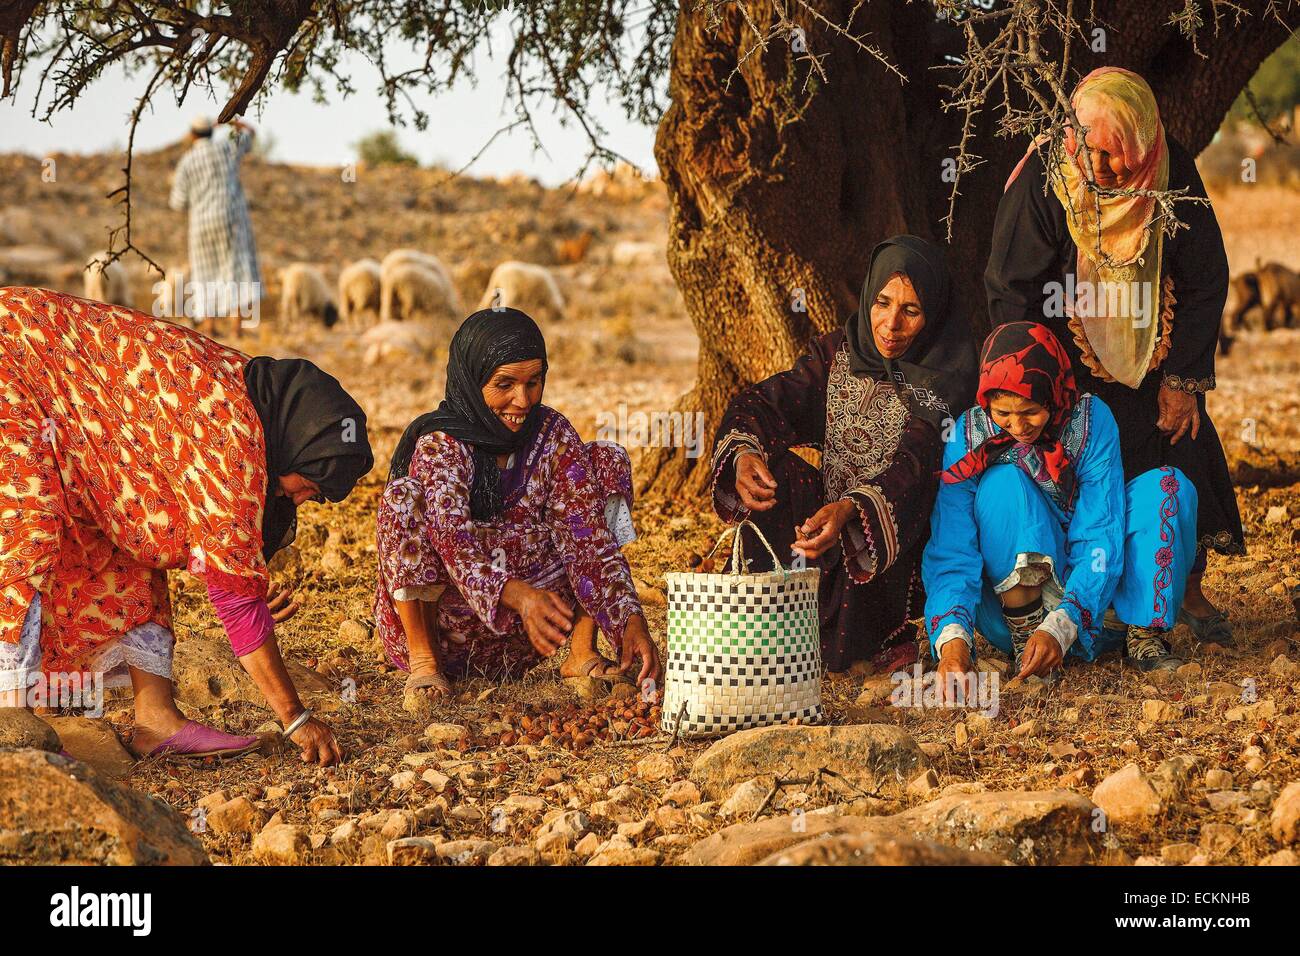 Morocco, Souss region, Tadrart, women-owned cooperative, collecting seeds of argan, collecting seeds Stock Photo